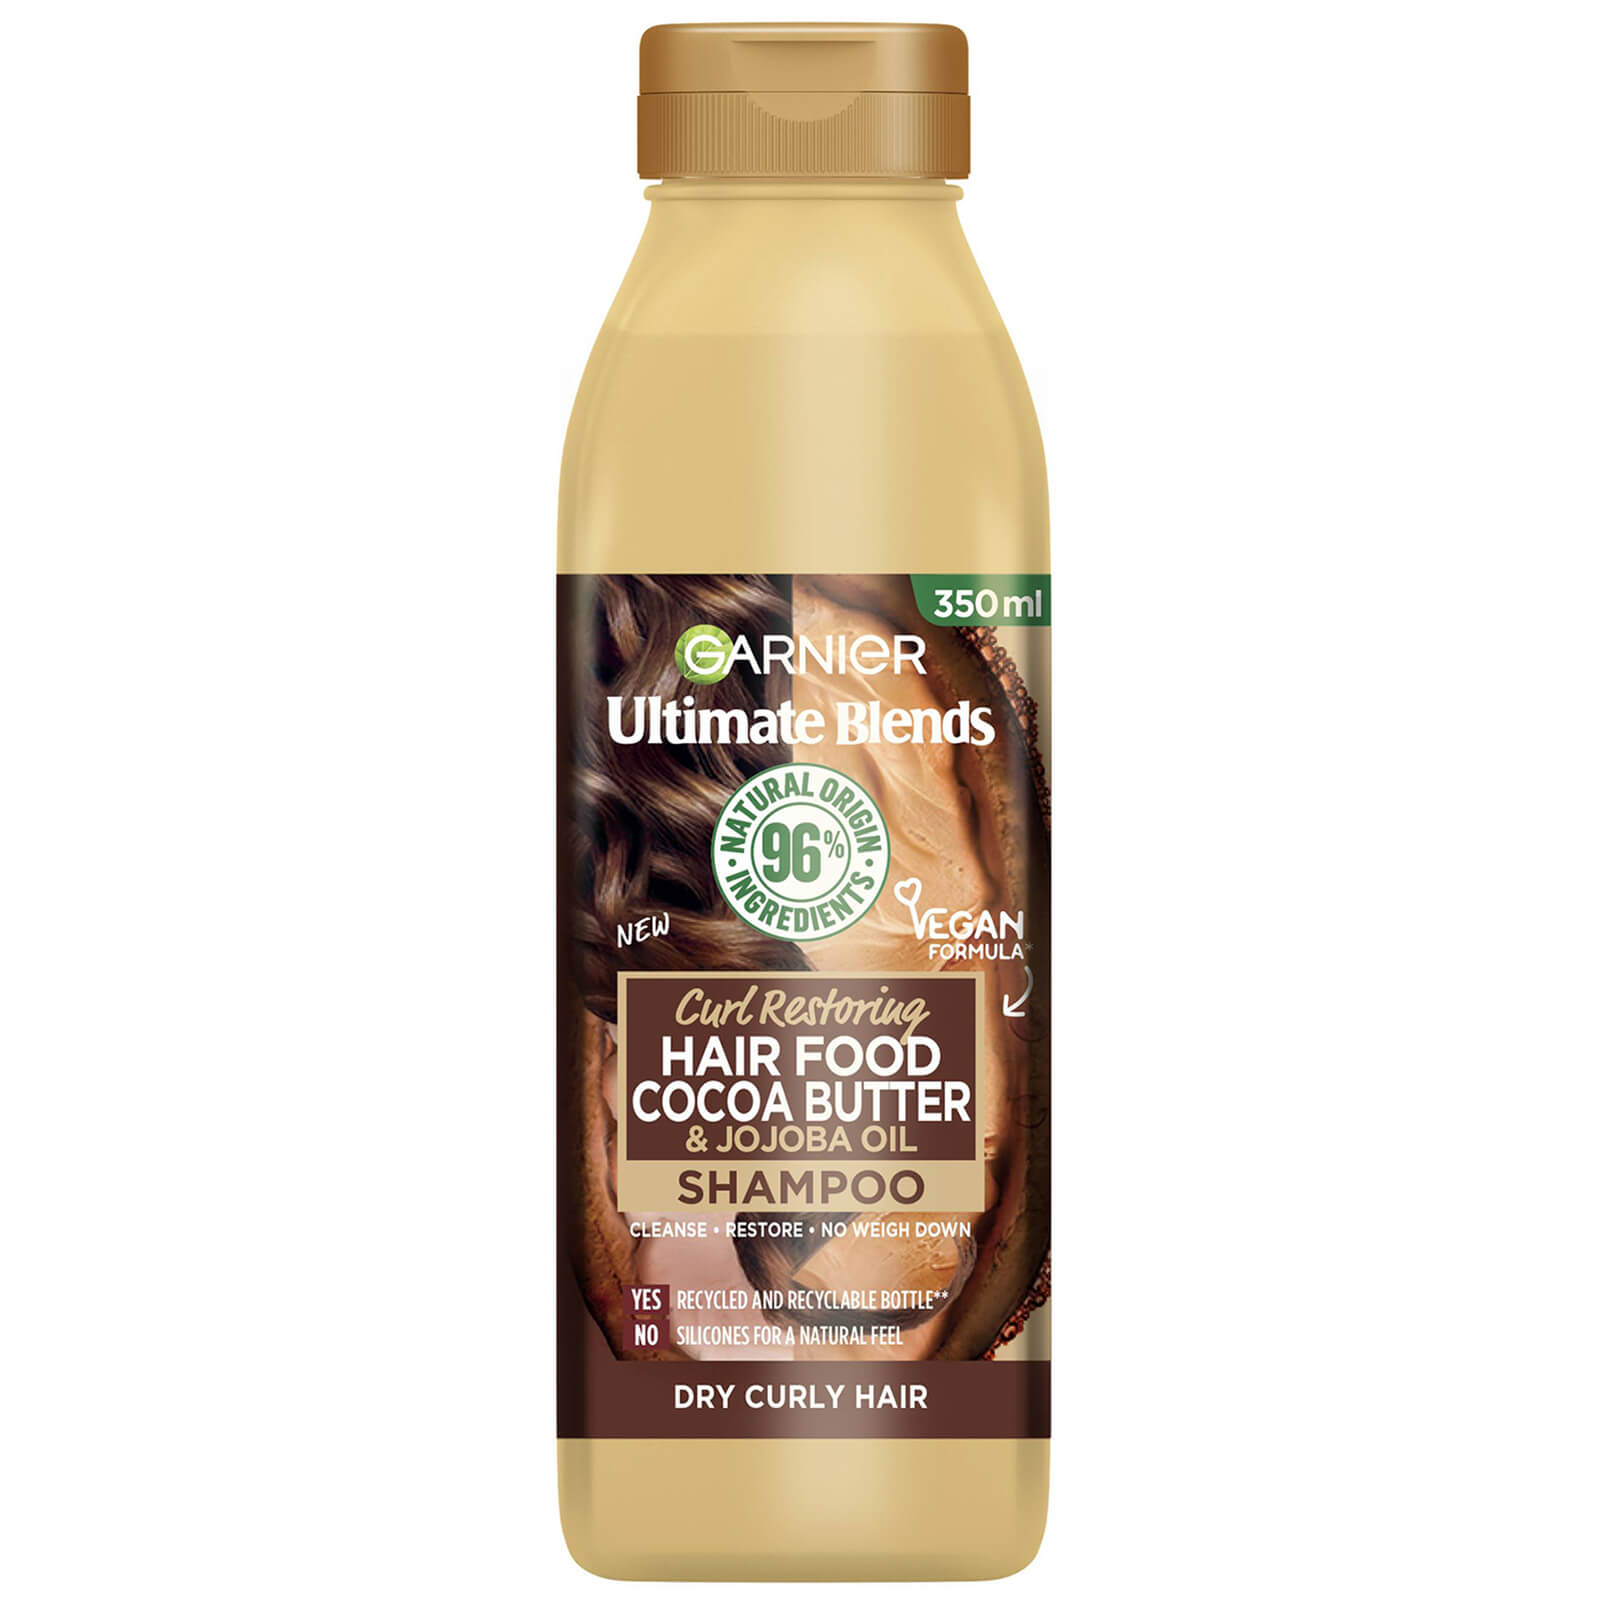 Image of Garnier Ultimate Blends Cocoa Butter Shampoo for Dry, Curly Hair 350ml